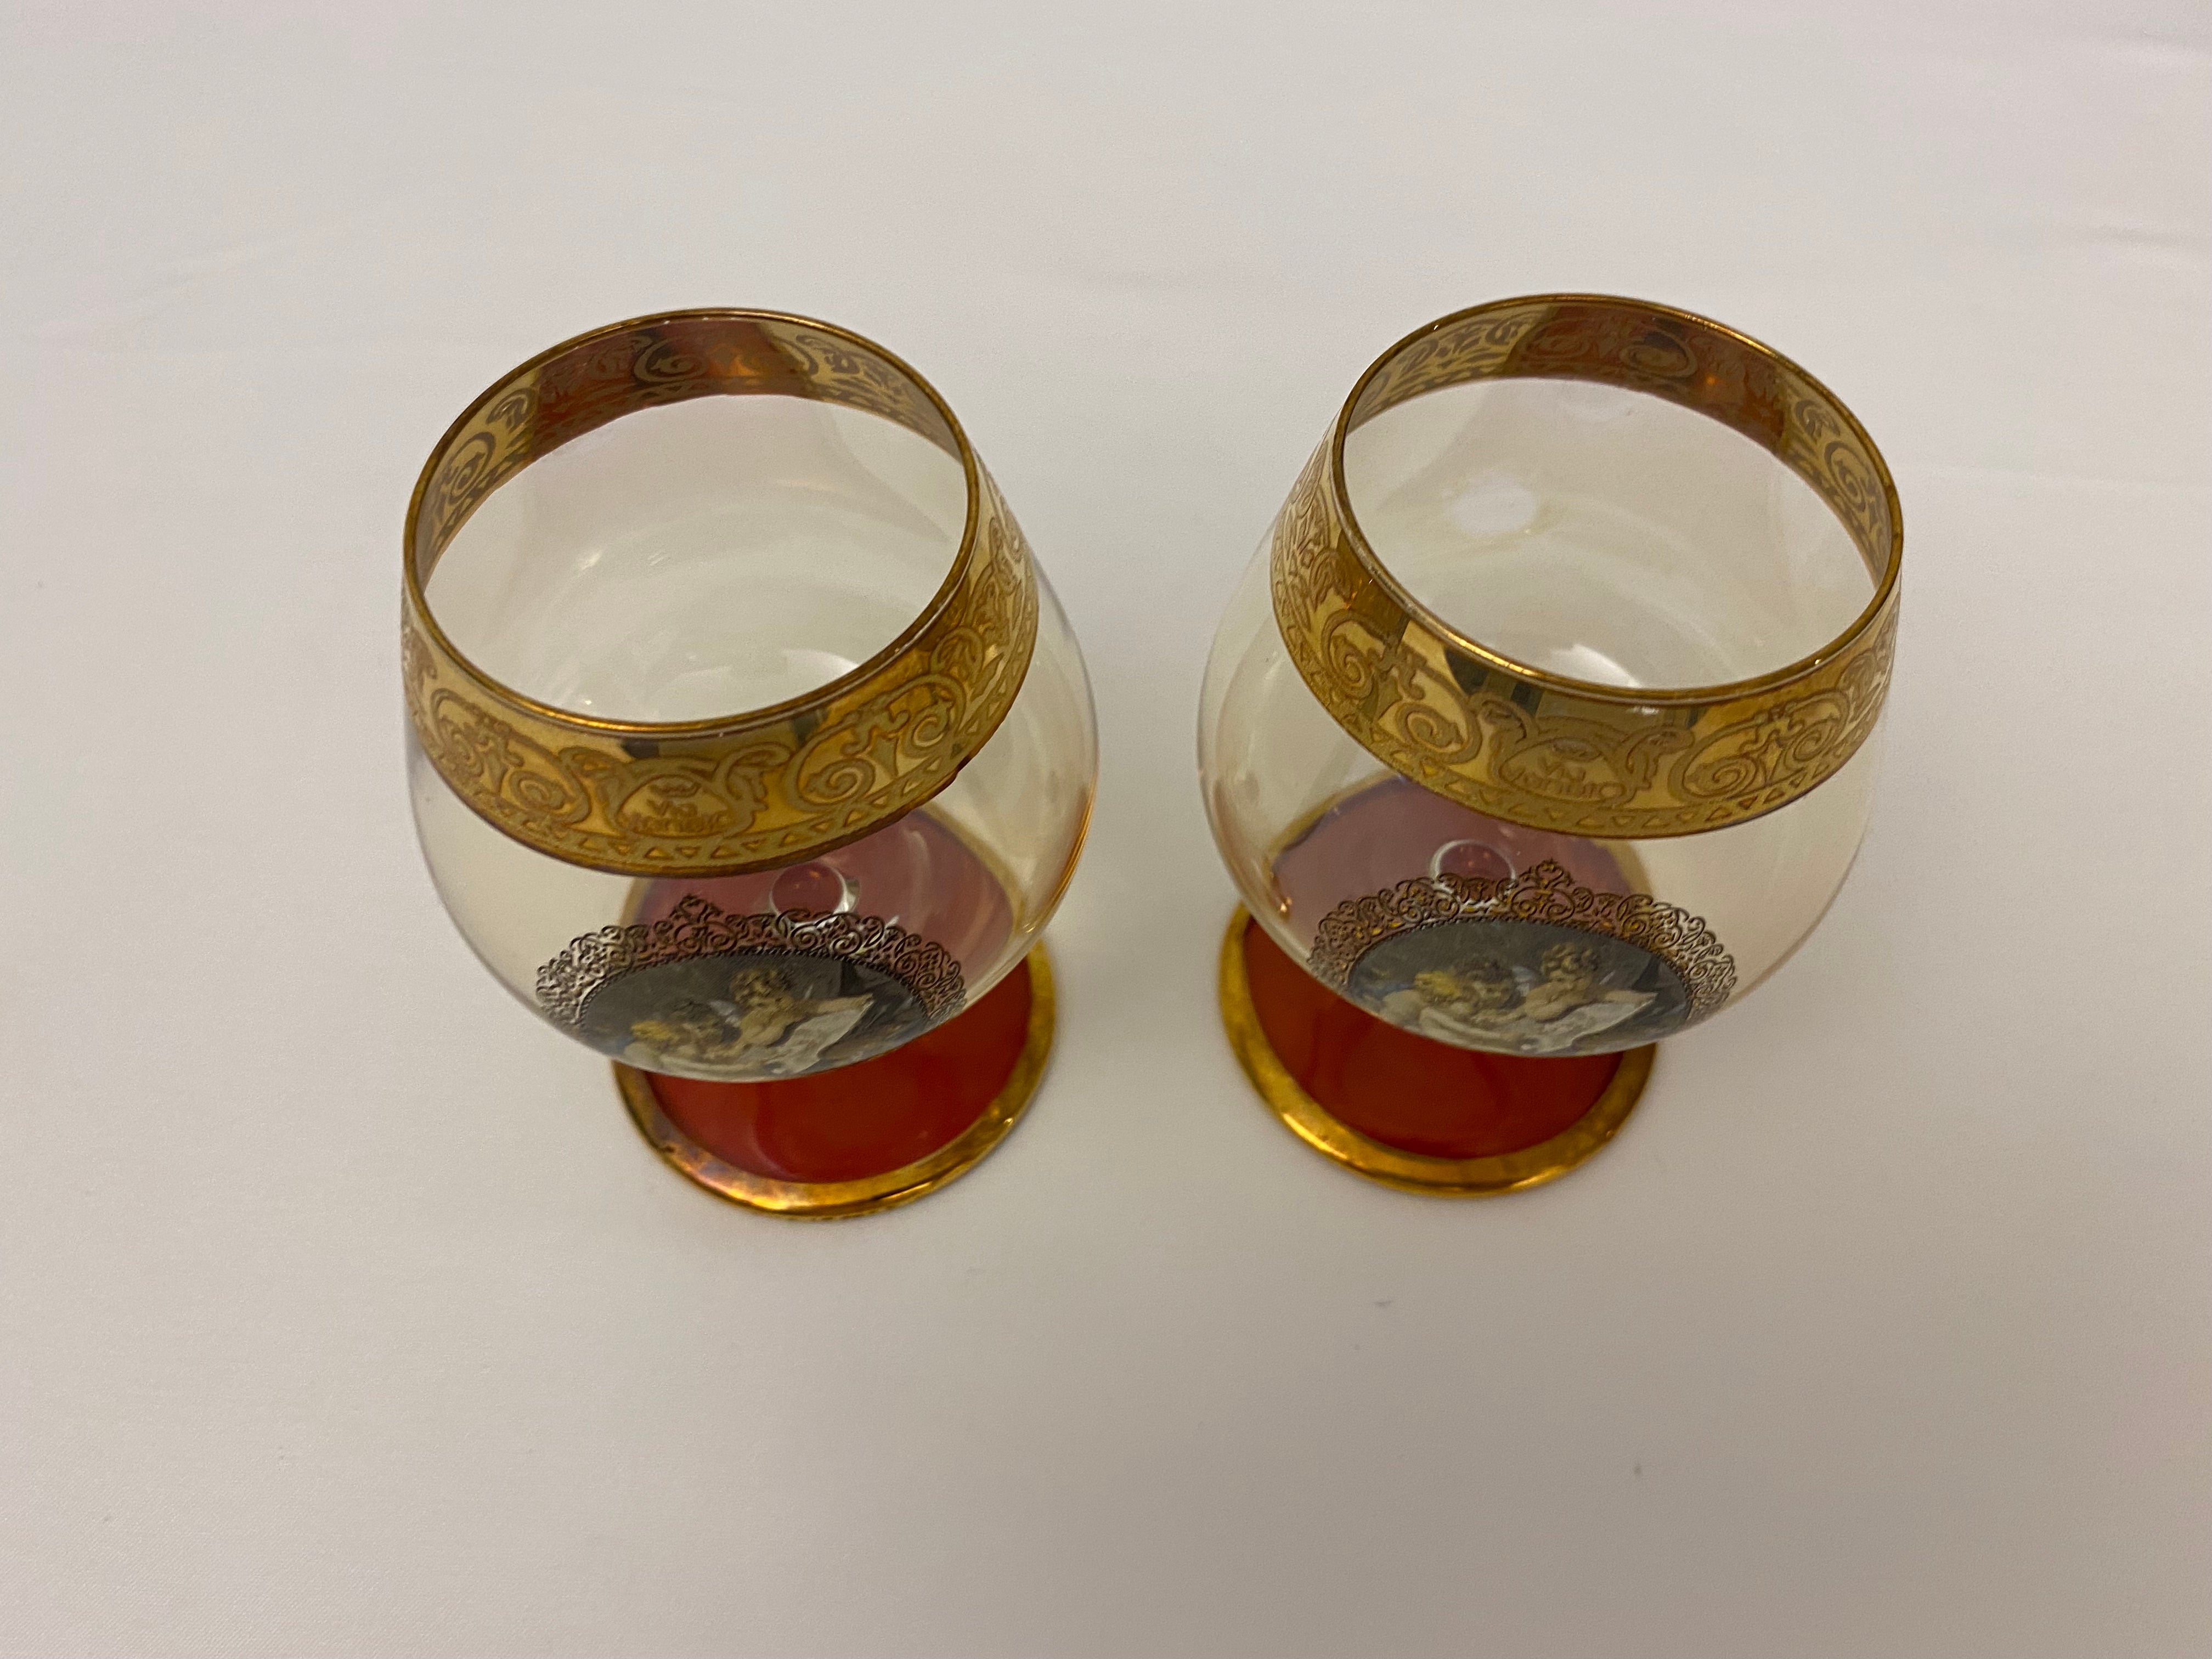 A fine vintage pair of cognac or liquor glasses, Via Veneto old world quality by Spiegelau. Wonderful hand painted gilded gold Cordial Glasses, circa 1940 from Italy. 

Matching rose, gold rose base. Each measures 2 3/4